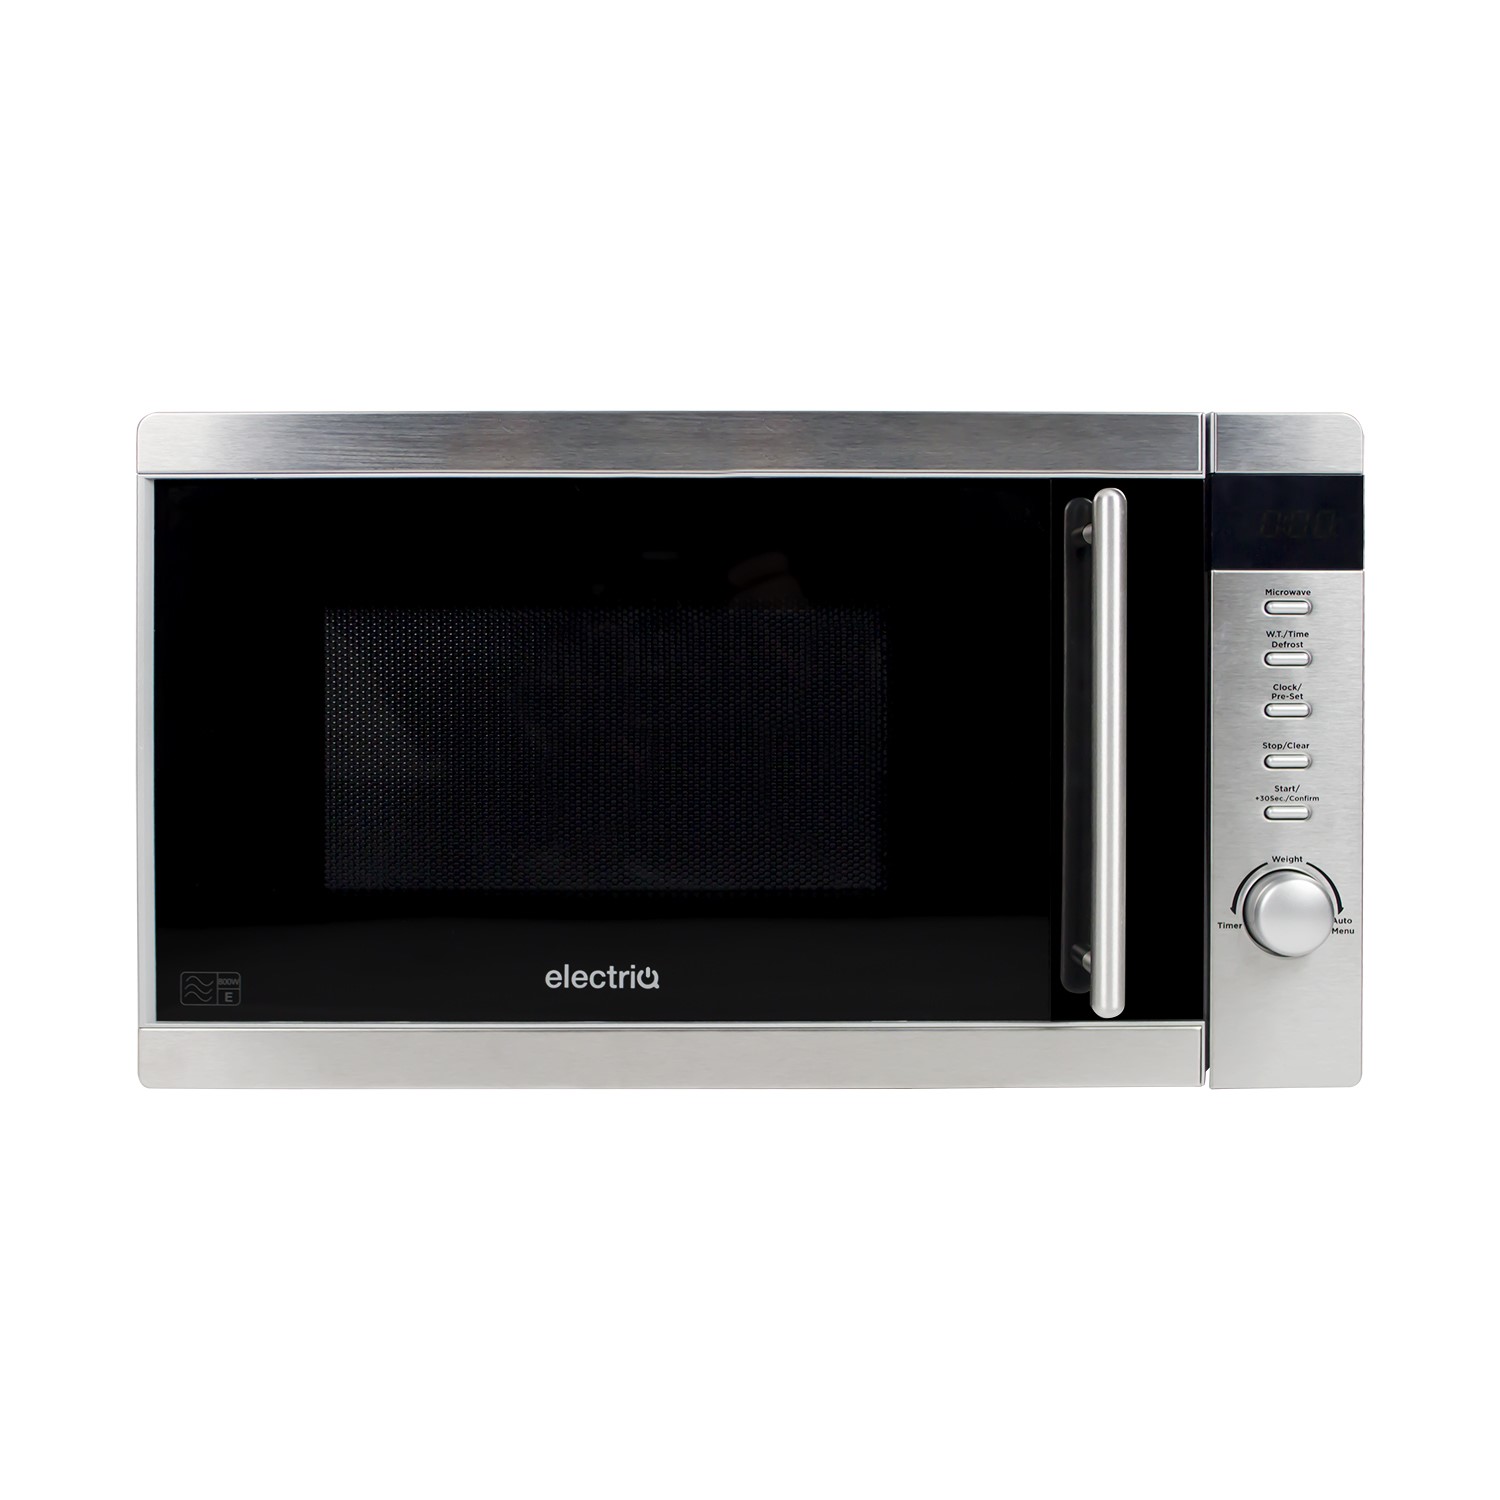 electriQ Solo Microwave - Freestanding - 800W - 20L - Stainless Steel